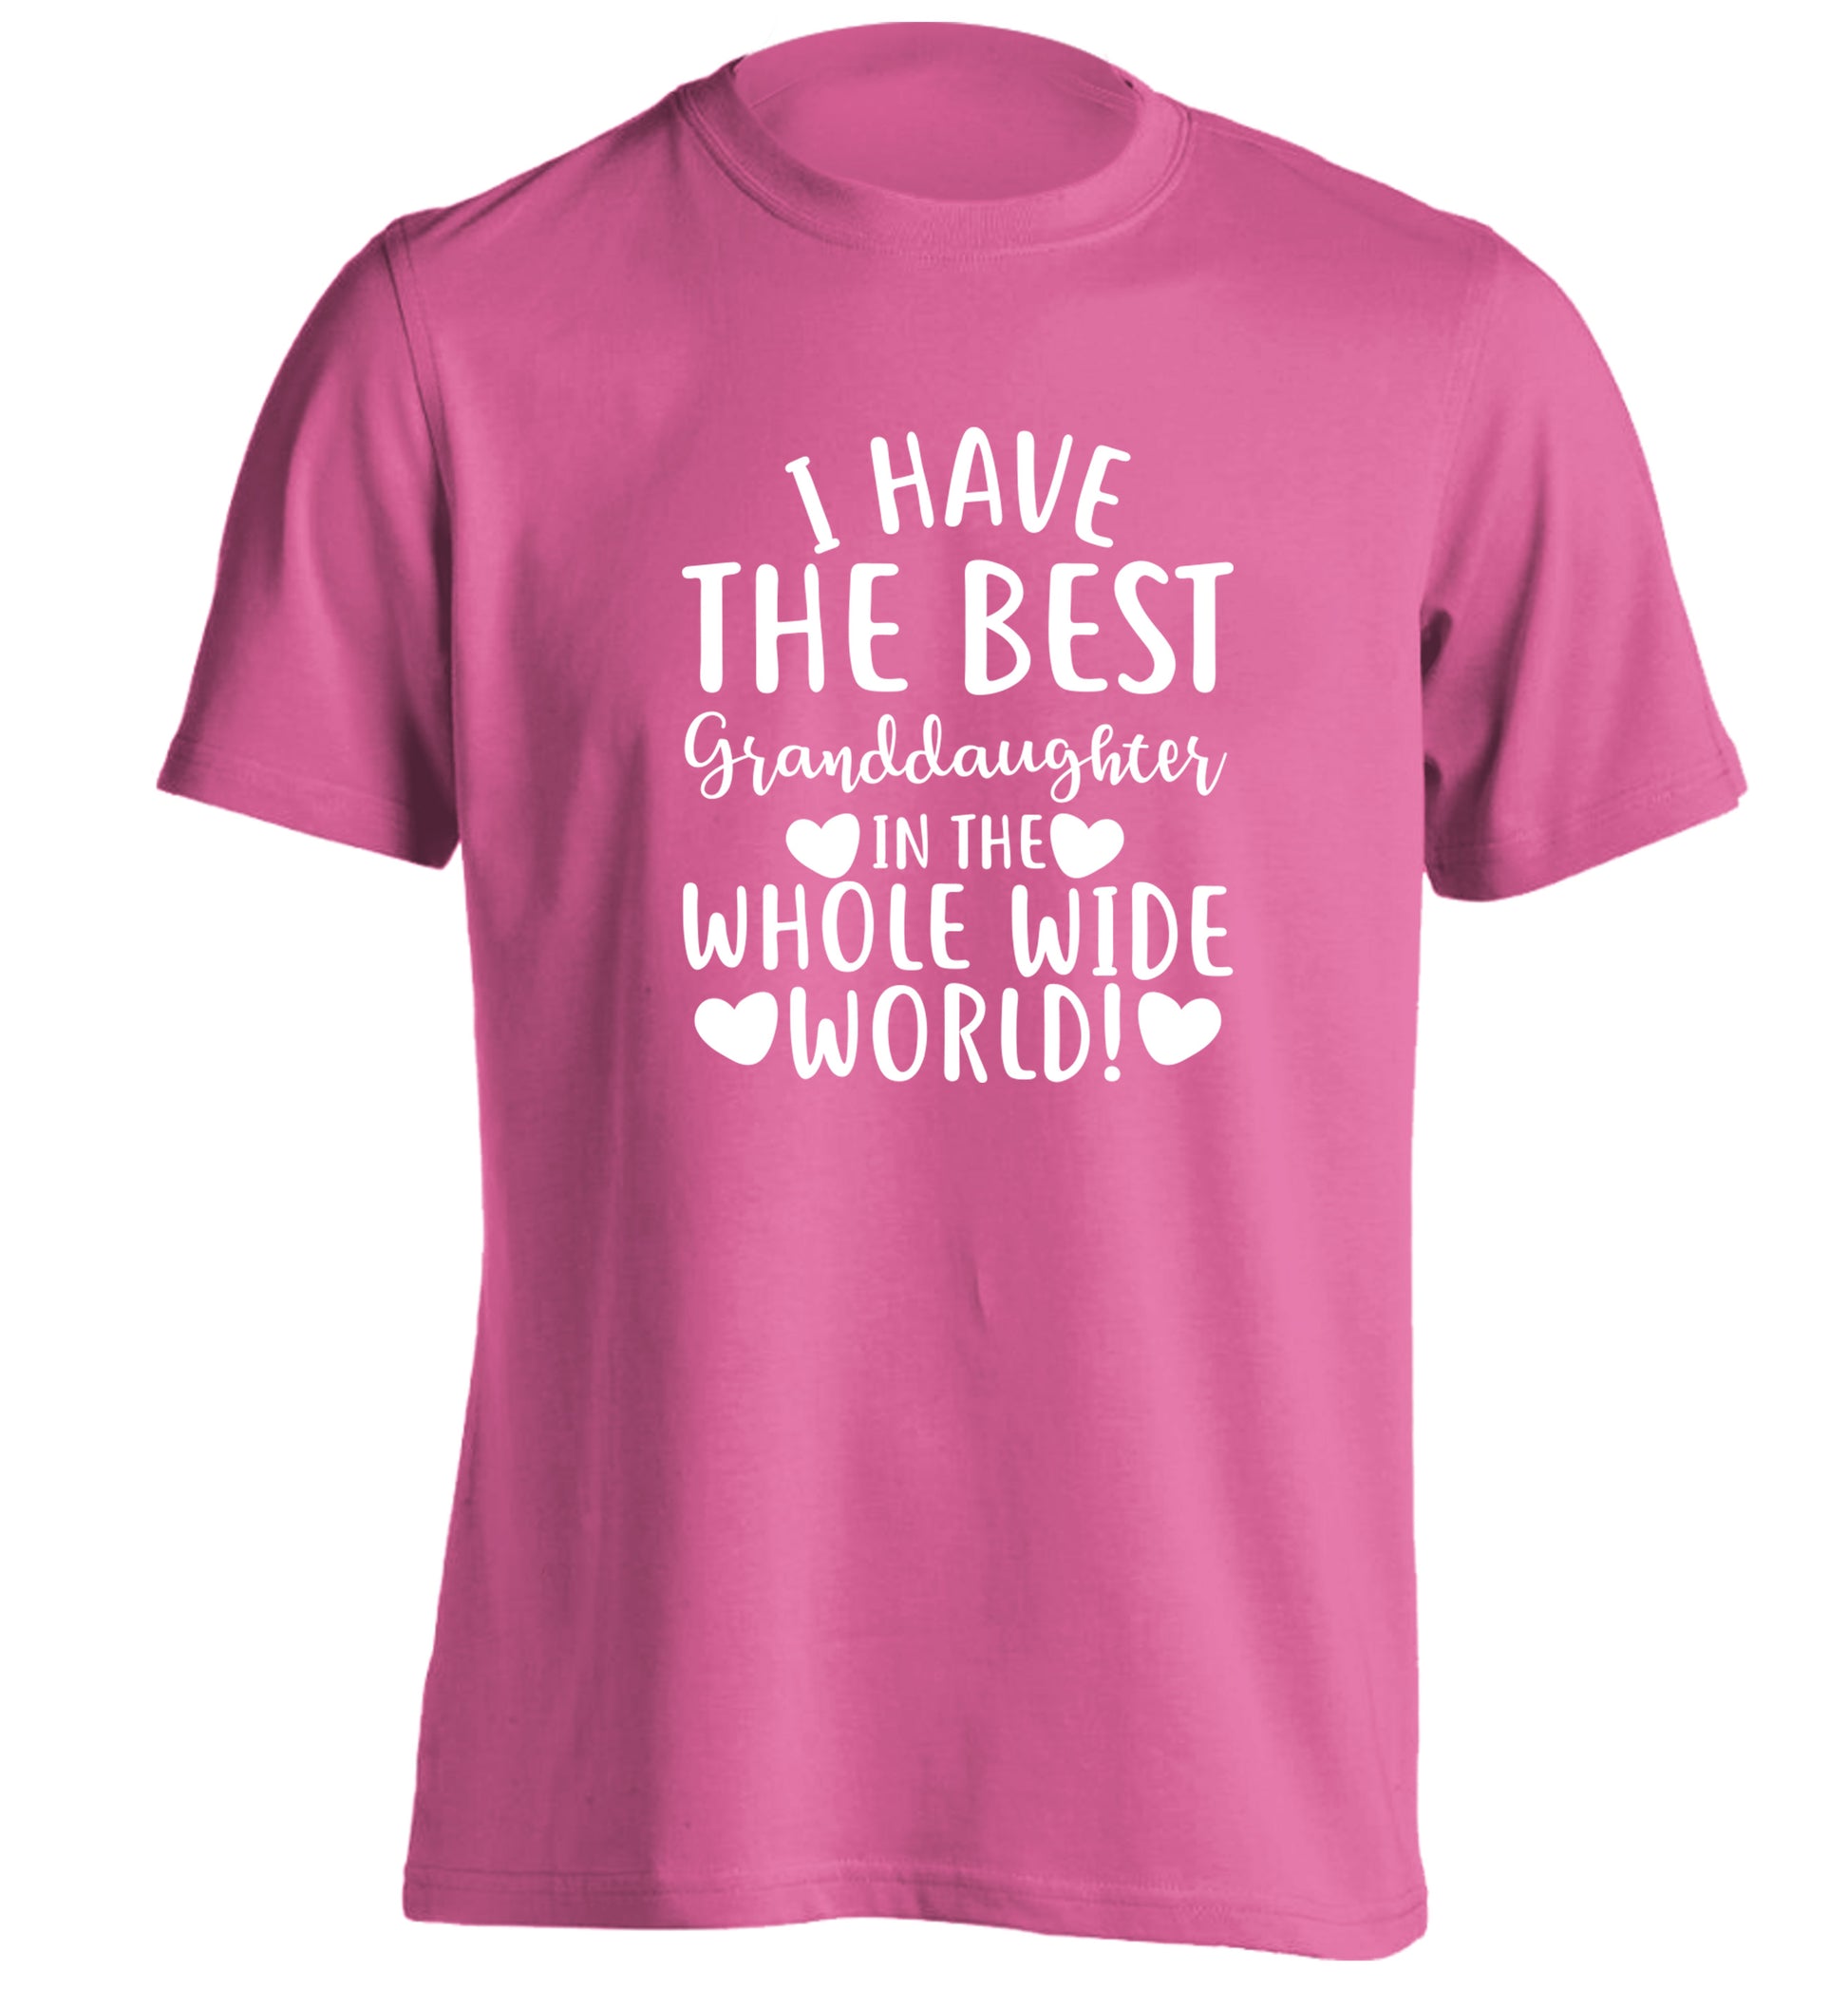 I have the best granddaughter in the whole wide world! adults unisex pink Tshirt 2XL